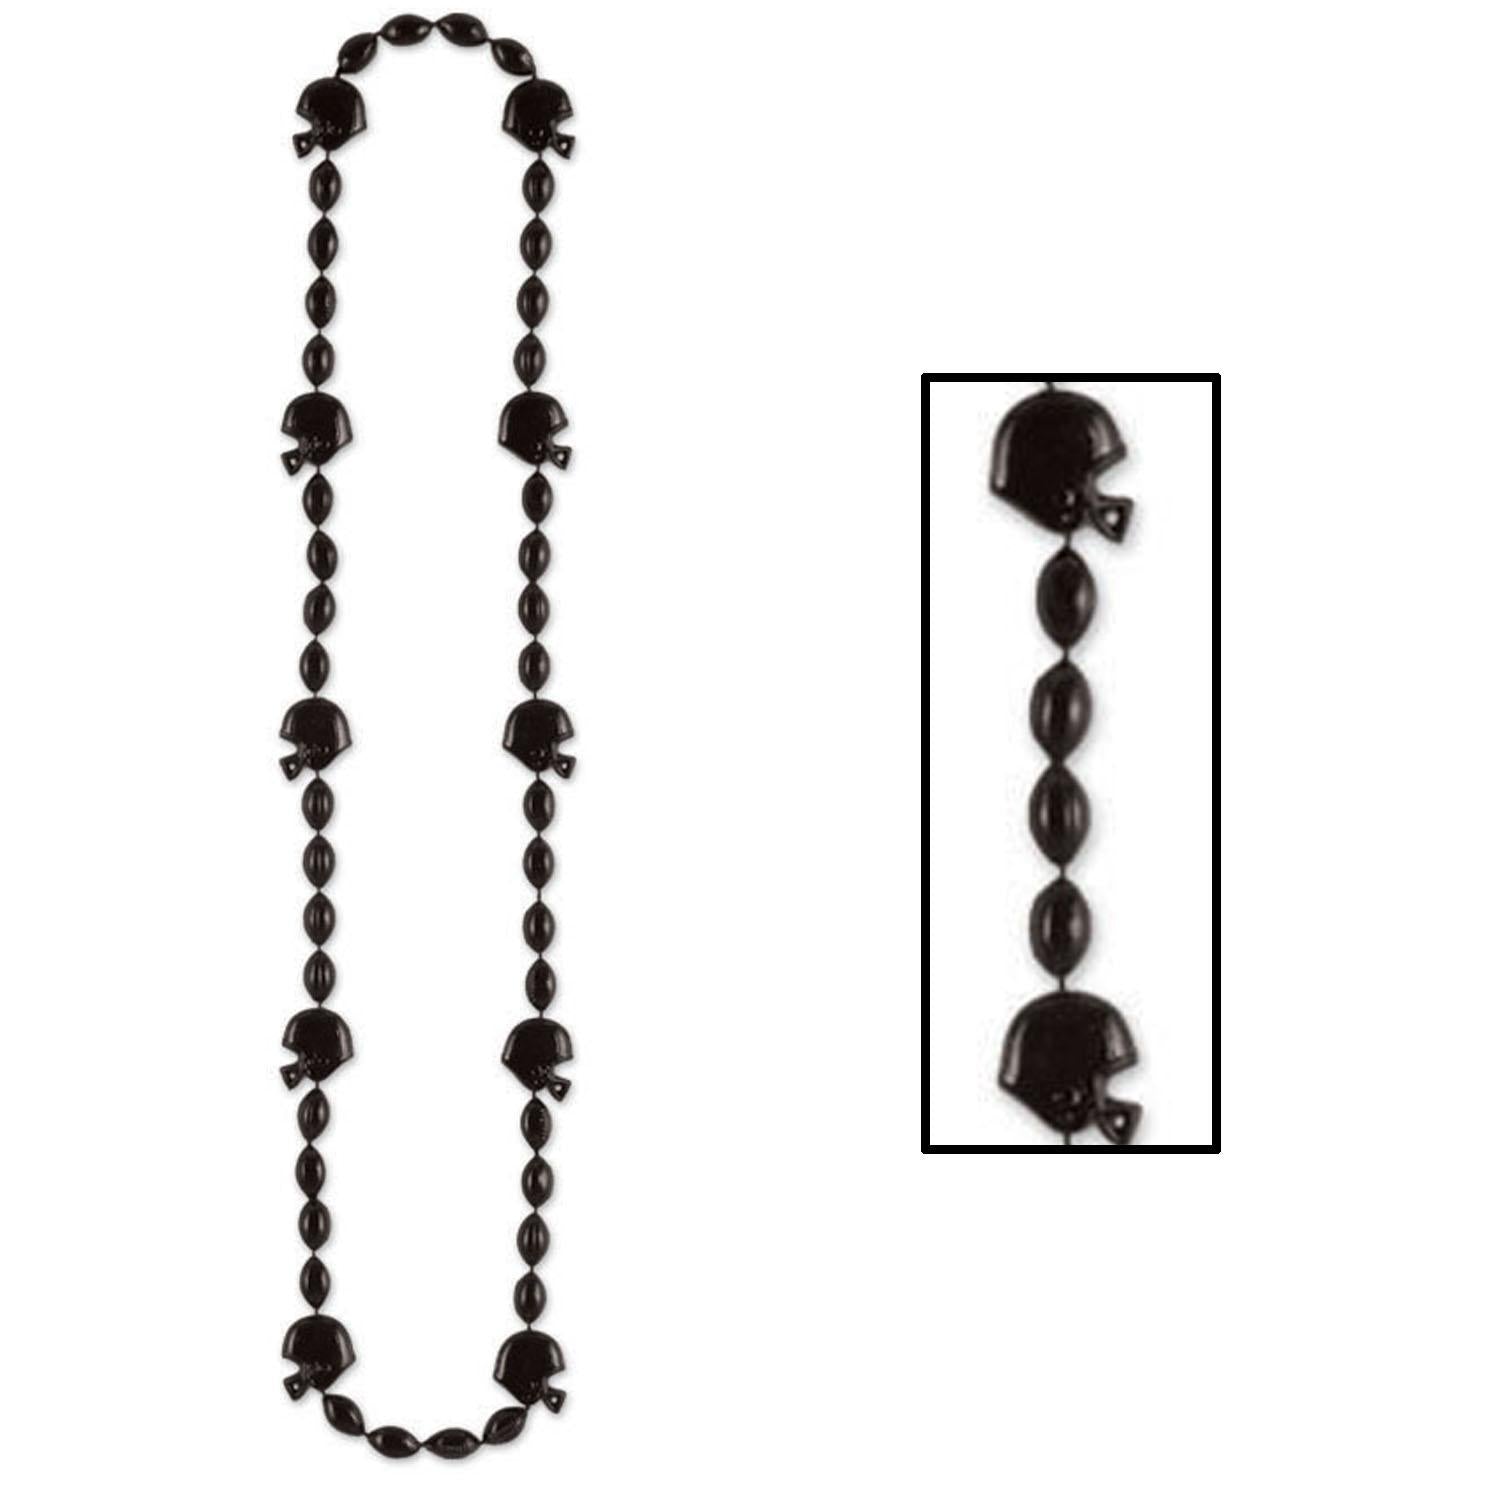 Beistle Football Party Bead Necklaces - Black